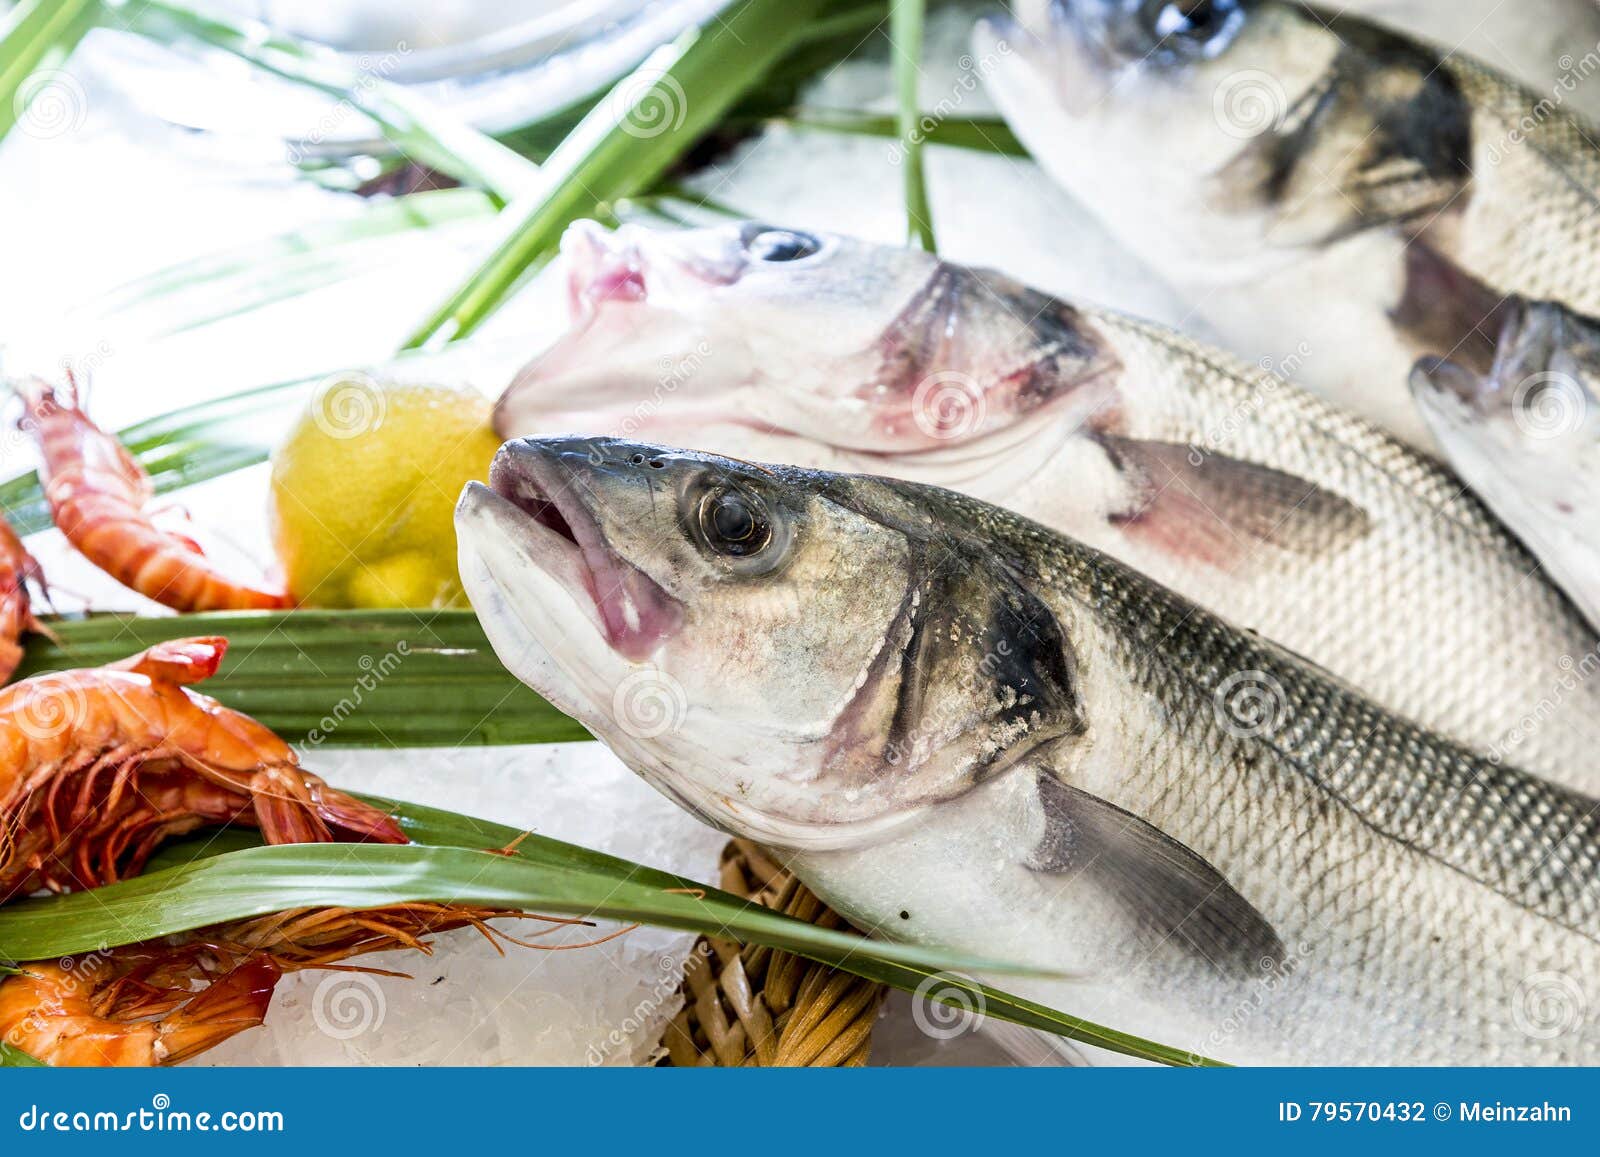 Whole Fresh Fishes Are Offered In The Fish Market Stock Photo Image